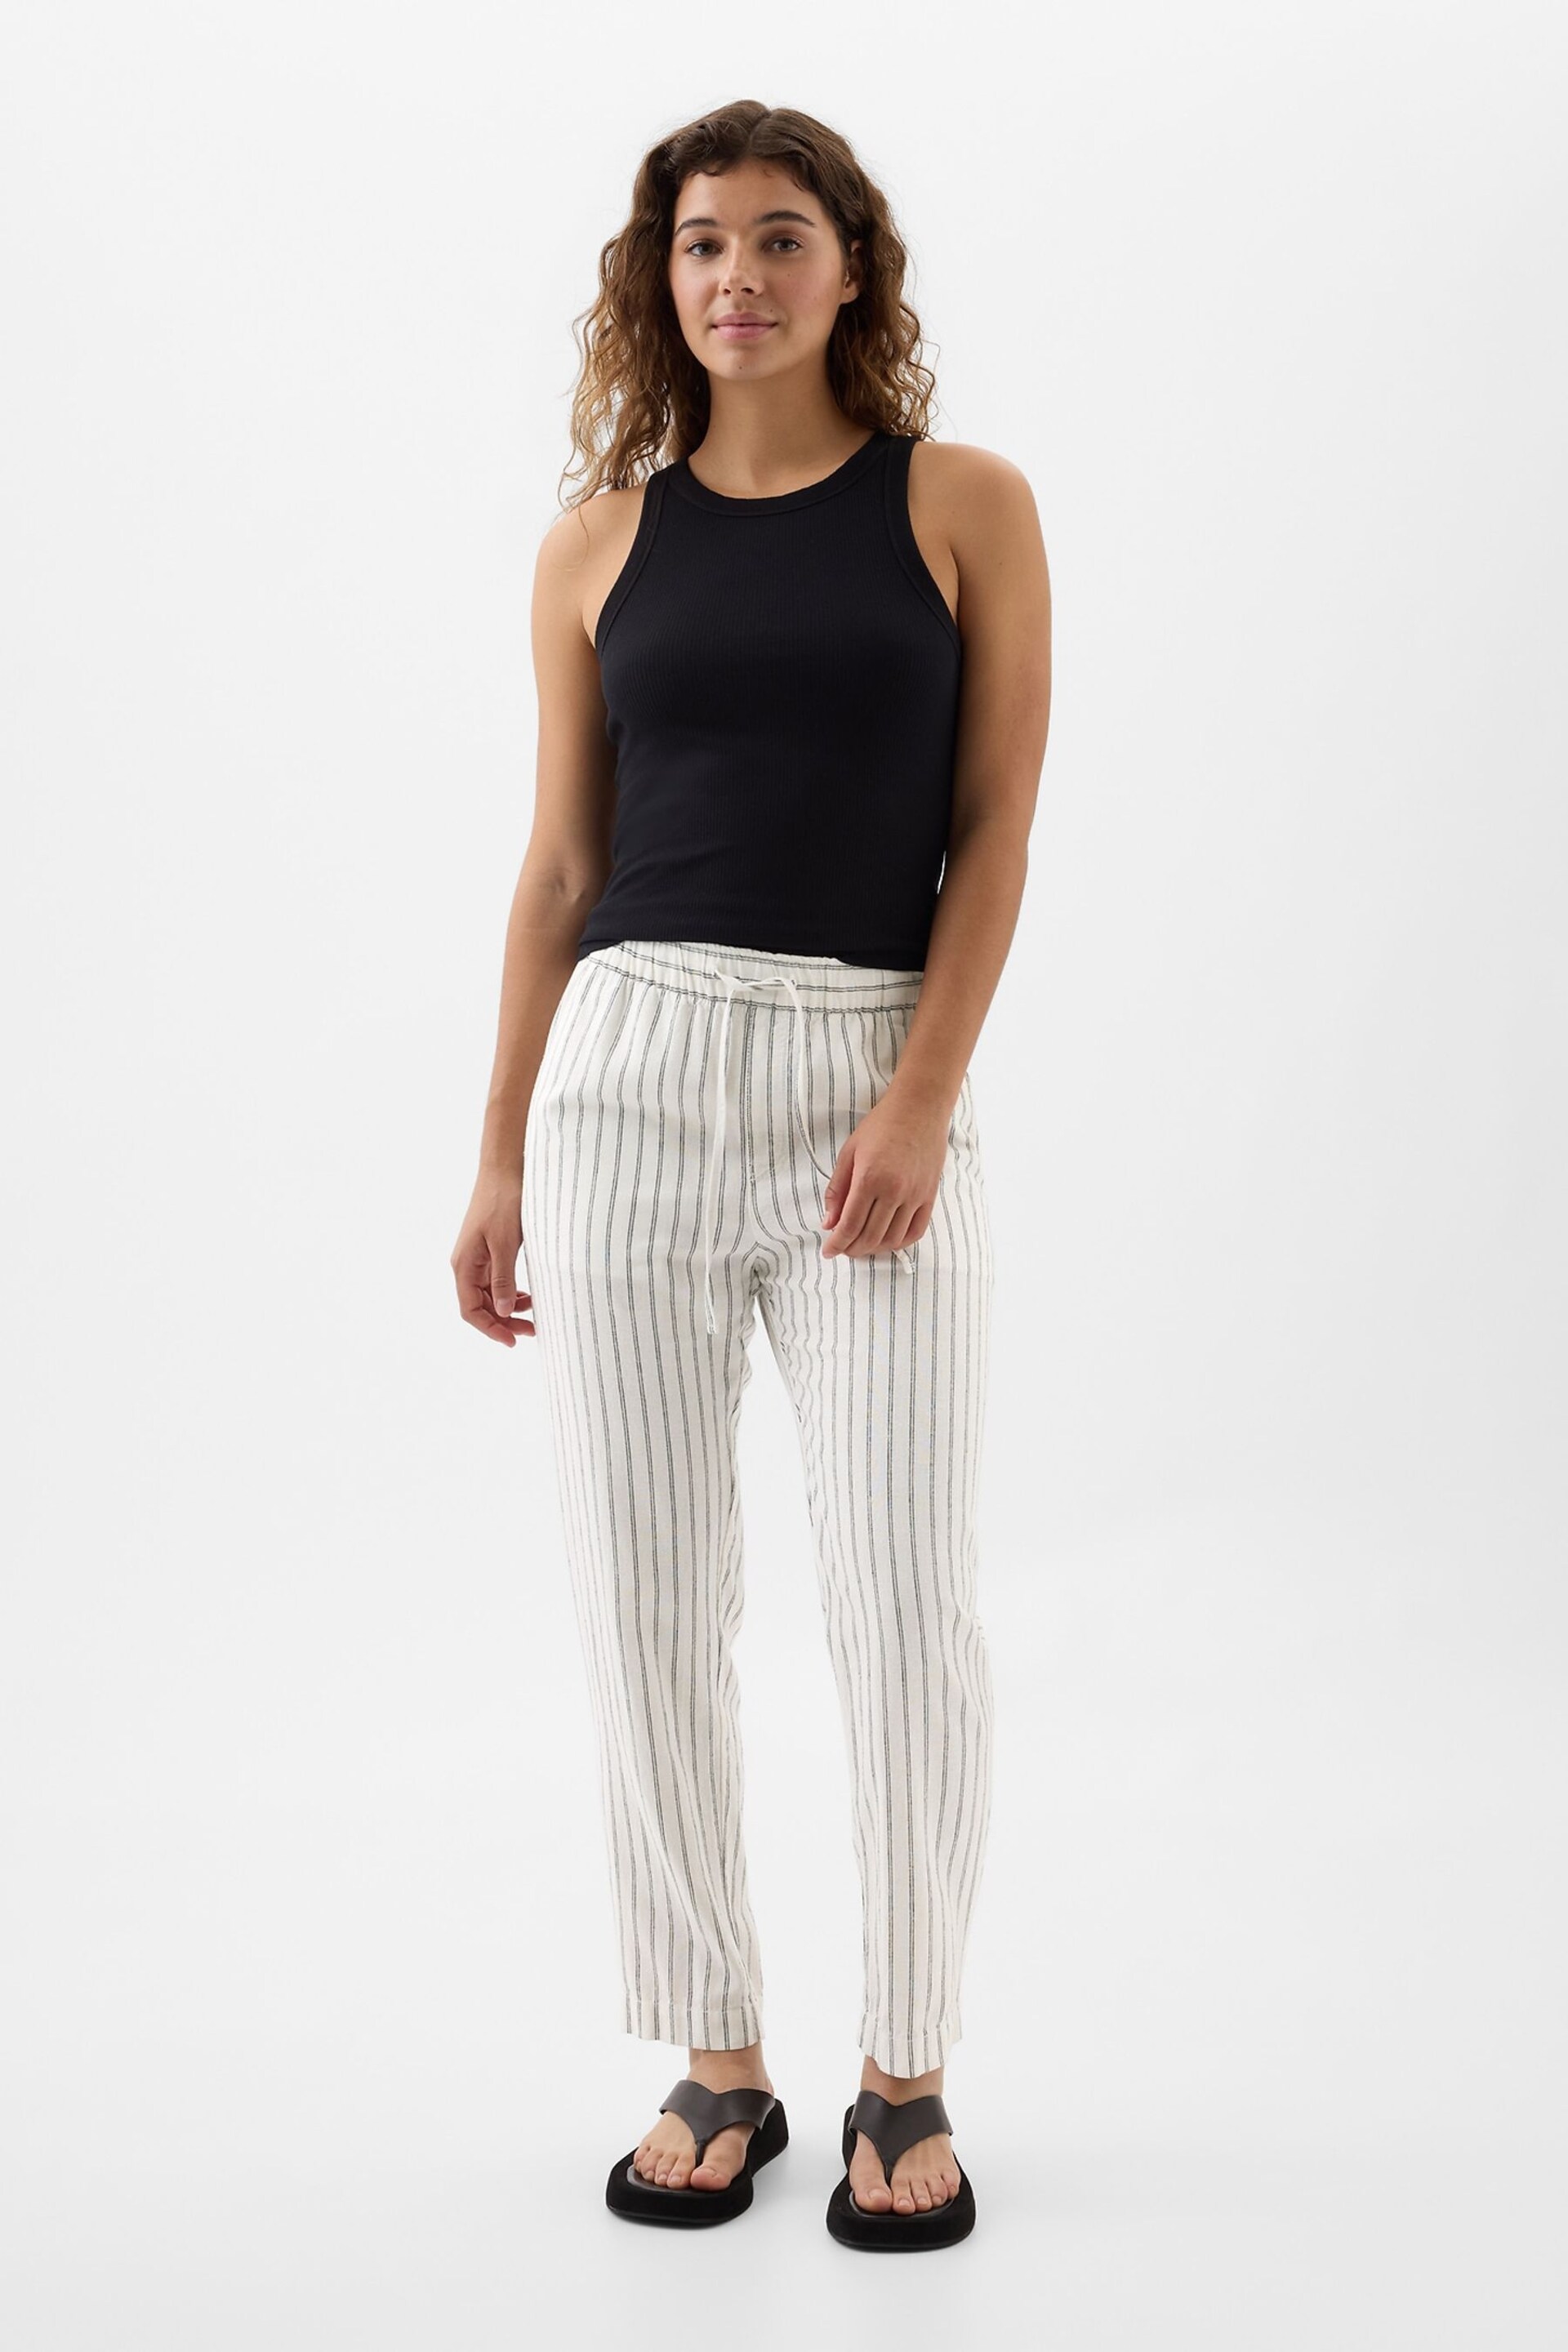 Gap Black/White Linen Cotton Pull On Taper Trousers - Image 1 of 2